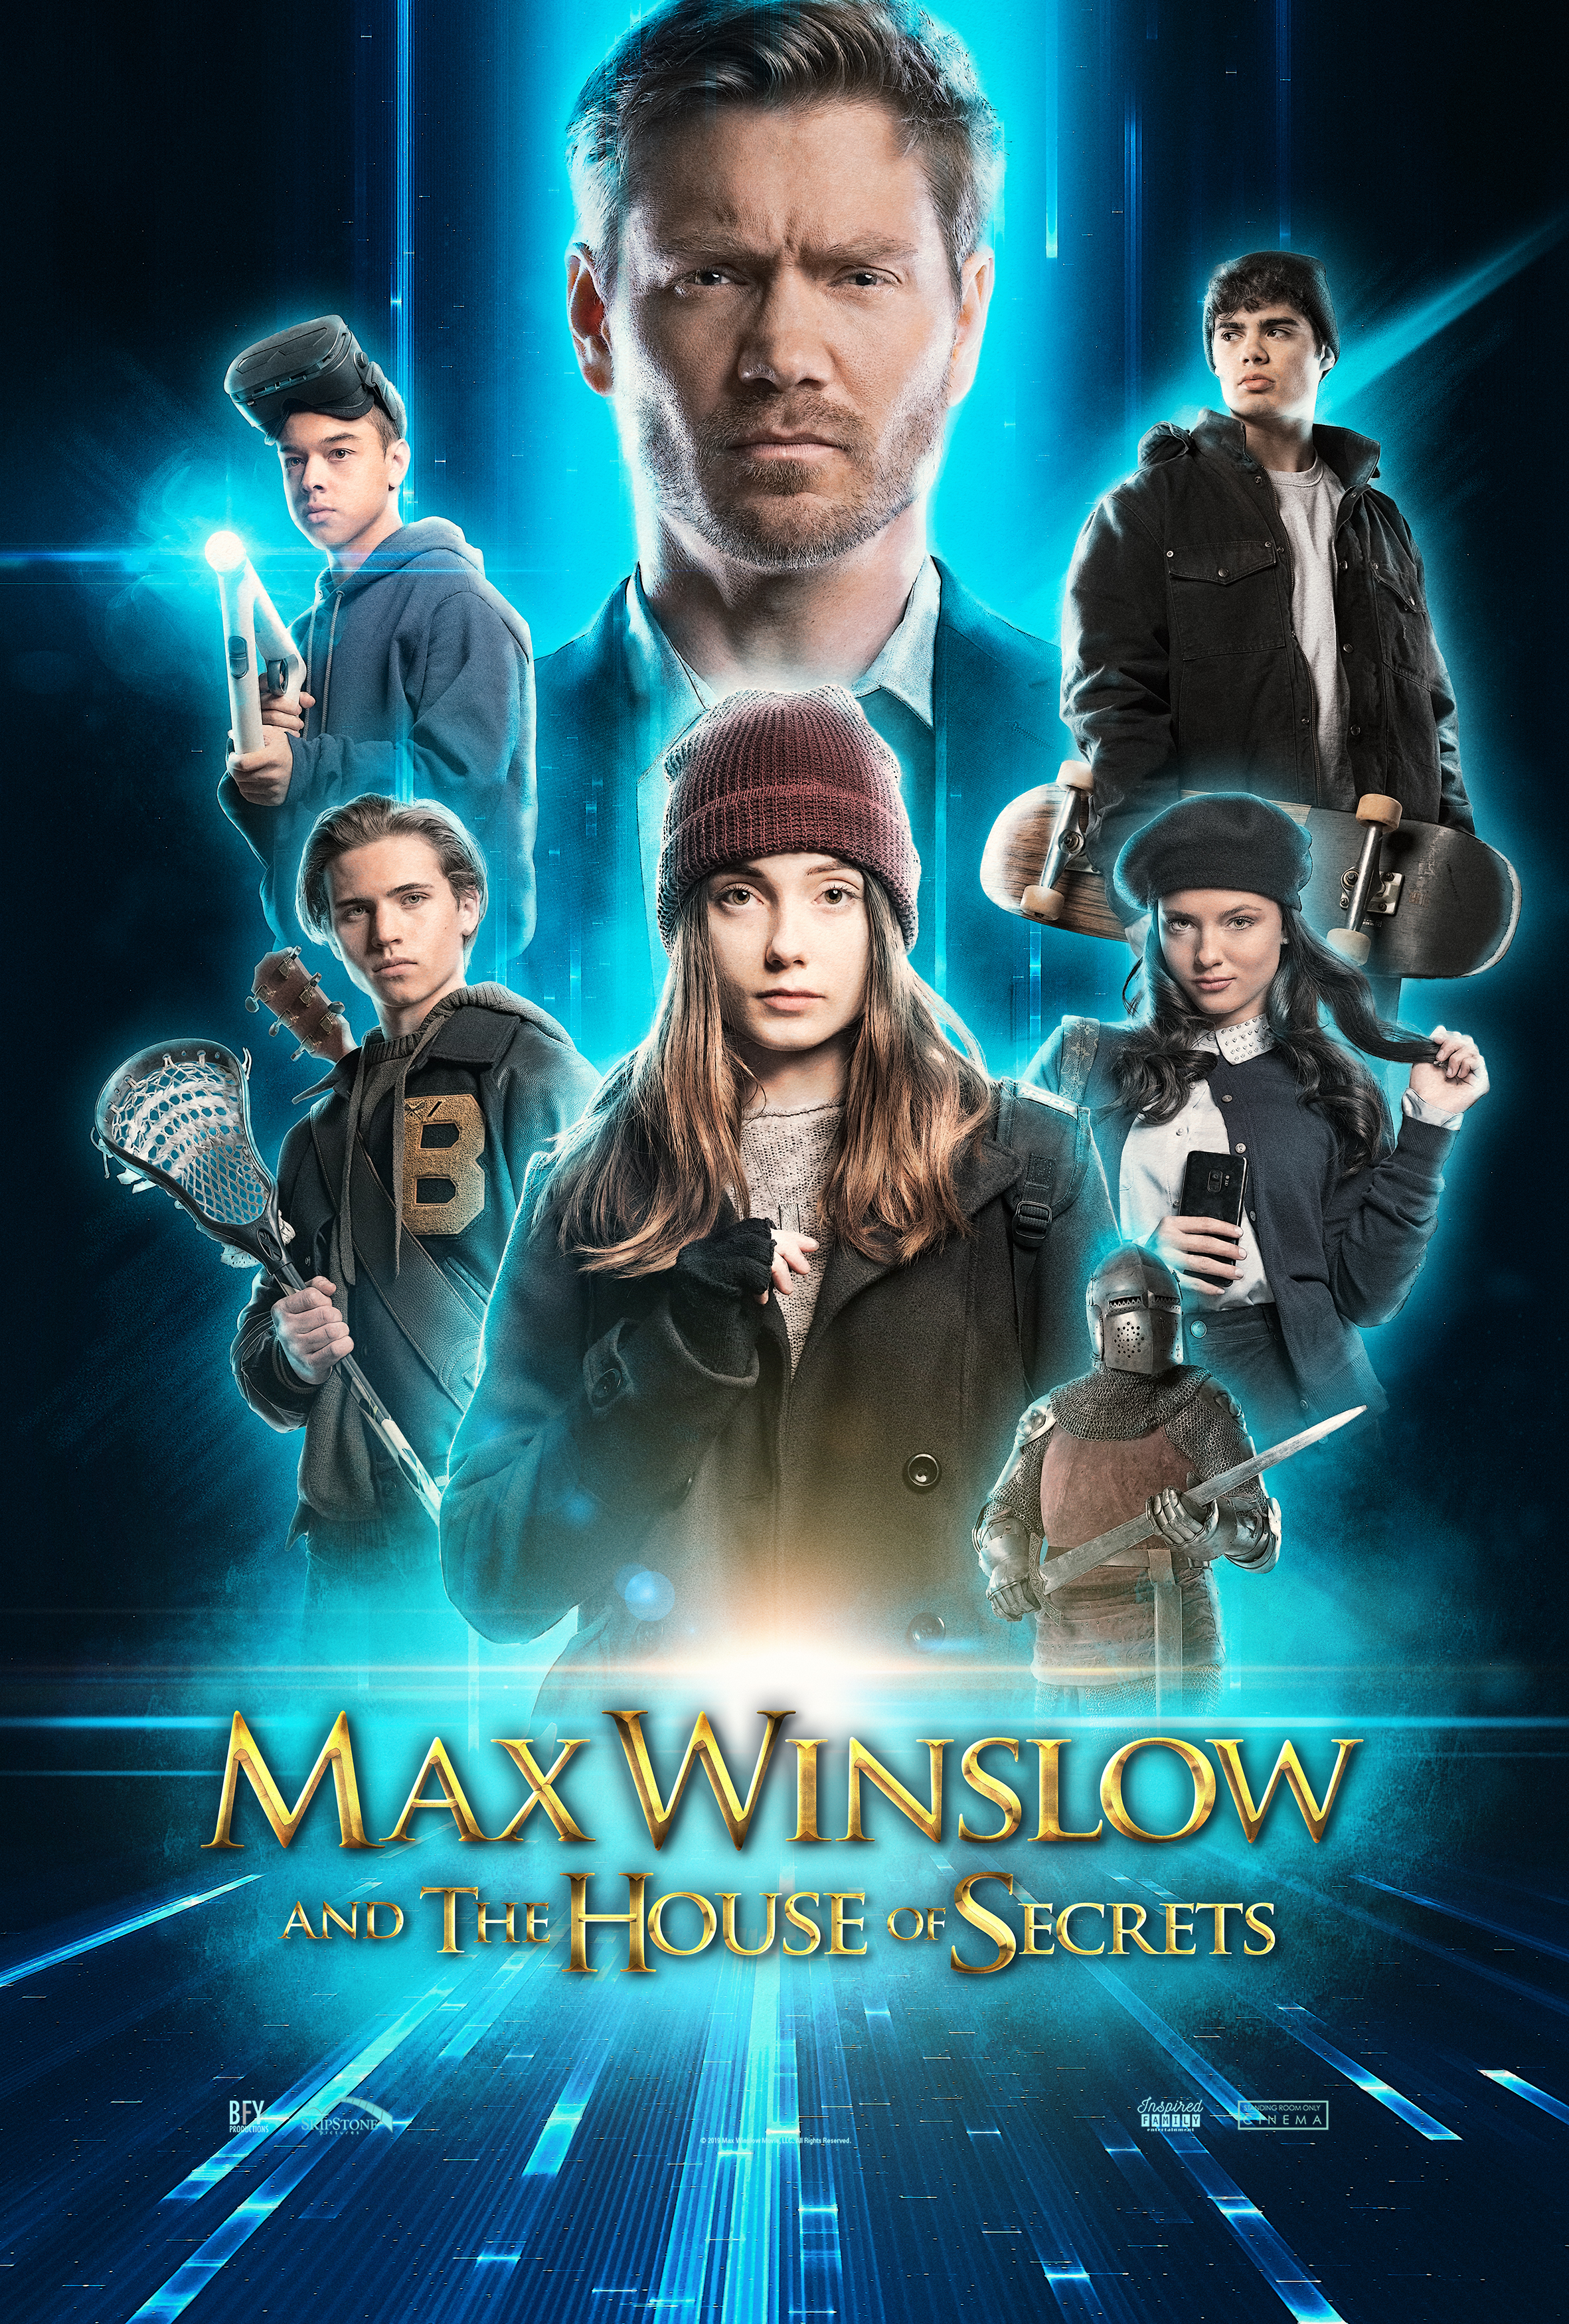 Max Winslow and the House of Secrets (2019) - ดูหนังออนไลน